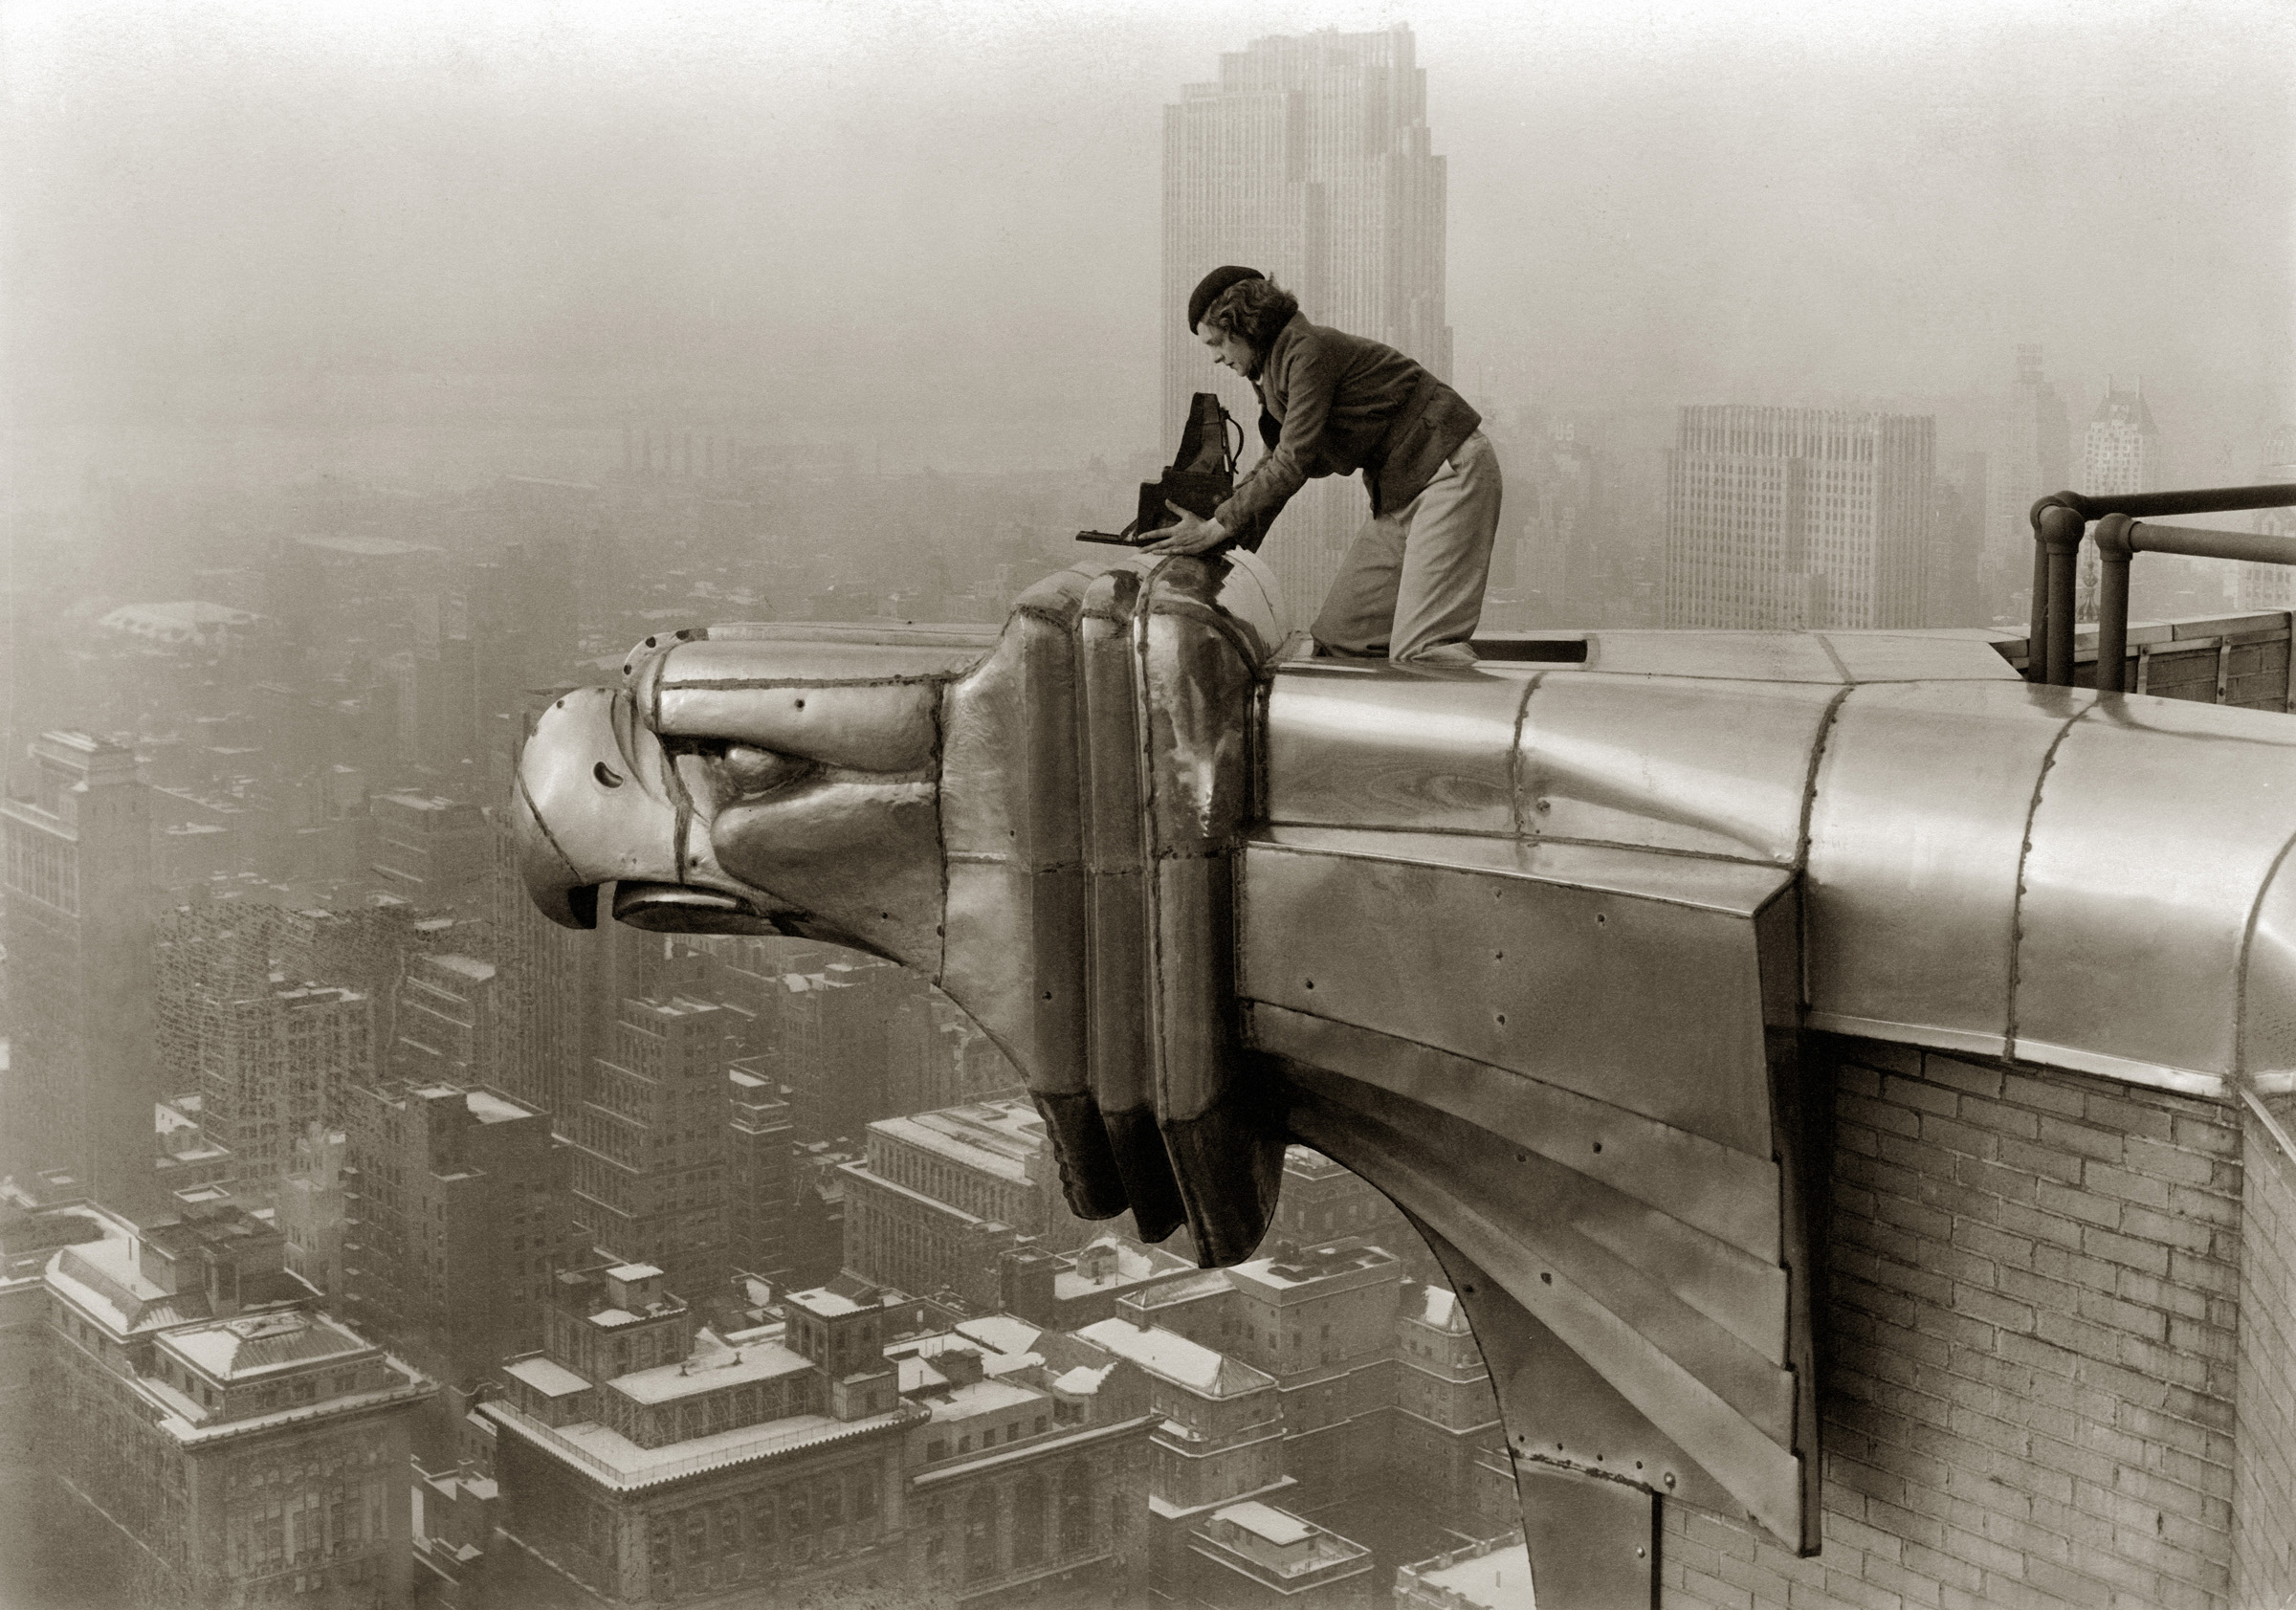 LIFE photographer Margaret Bourke-White making a precarious photo from the Chrysler Building. (Oscar Graubner&mdash;The LIFE Images Collection/Getty)